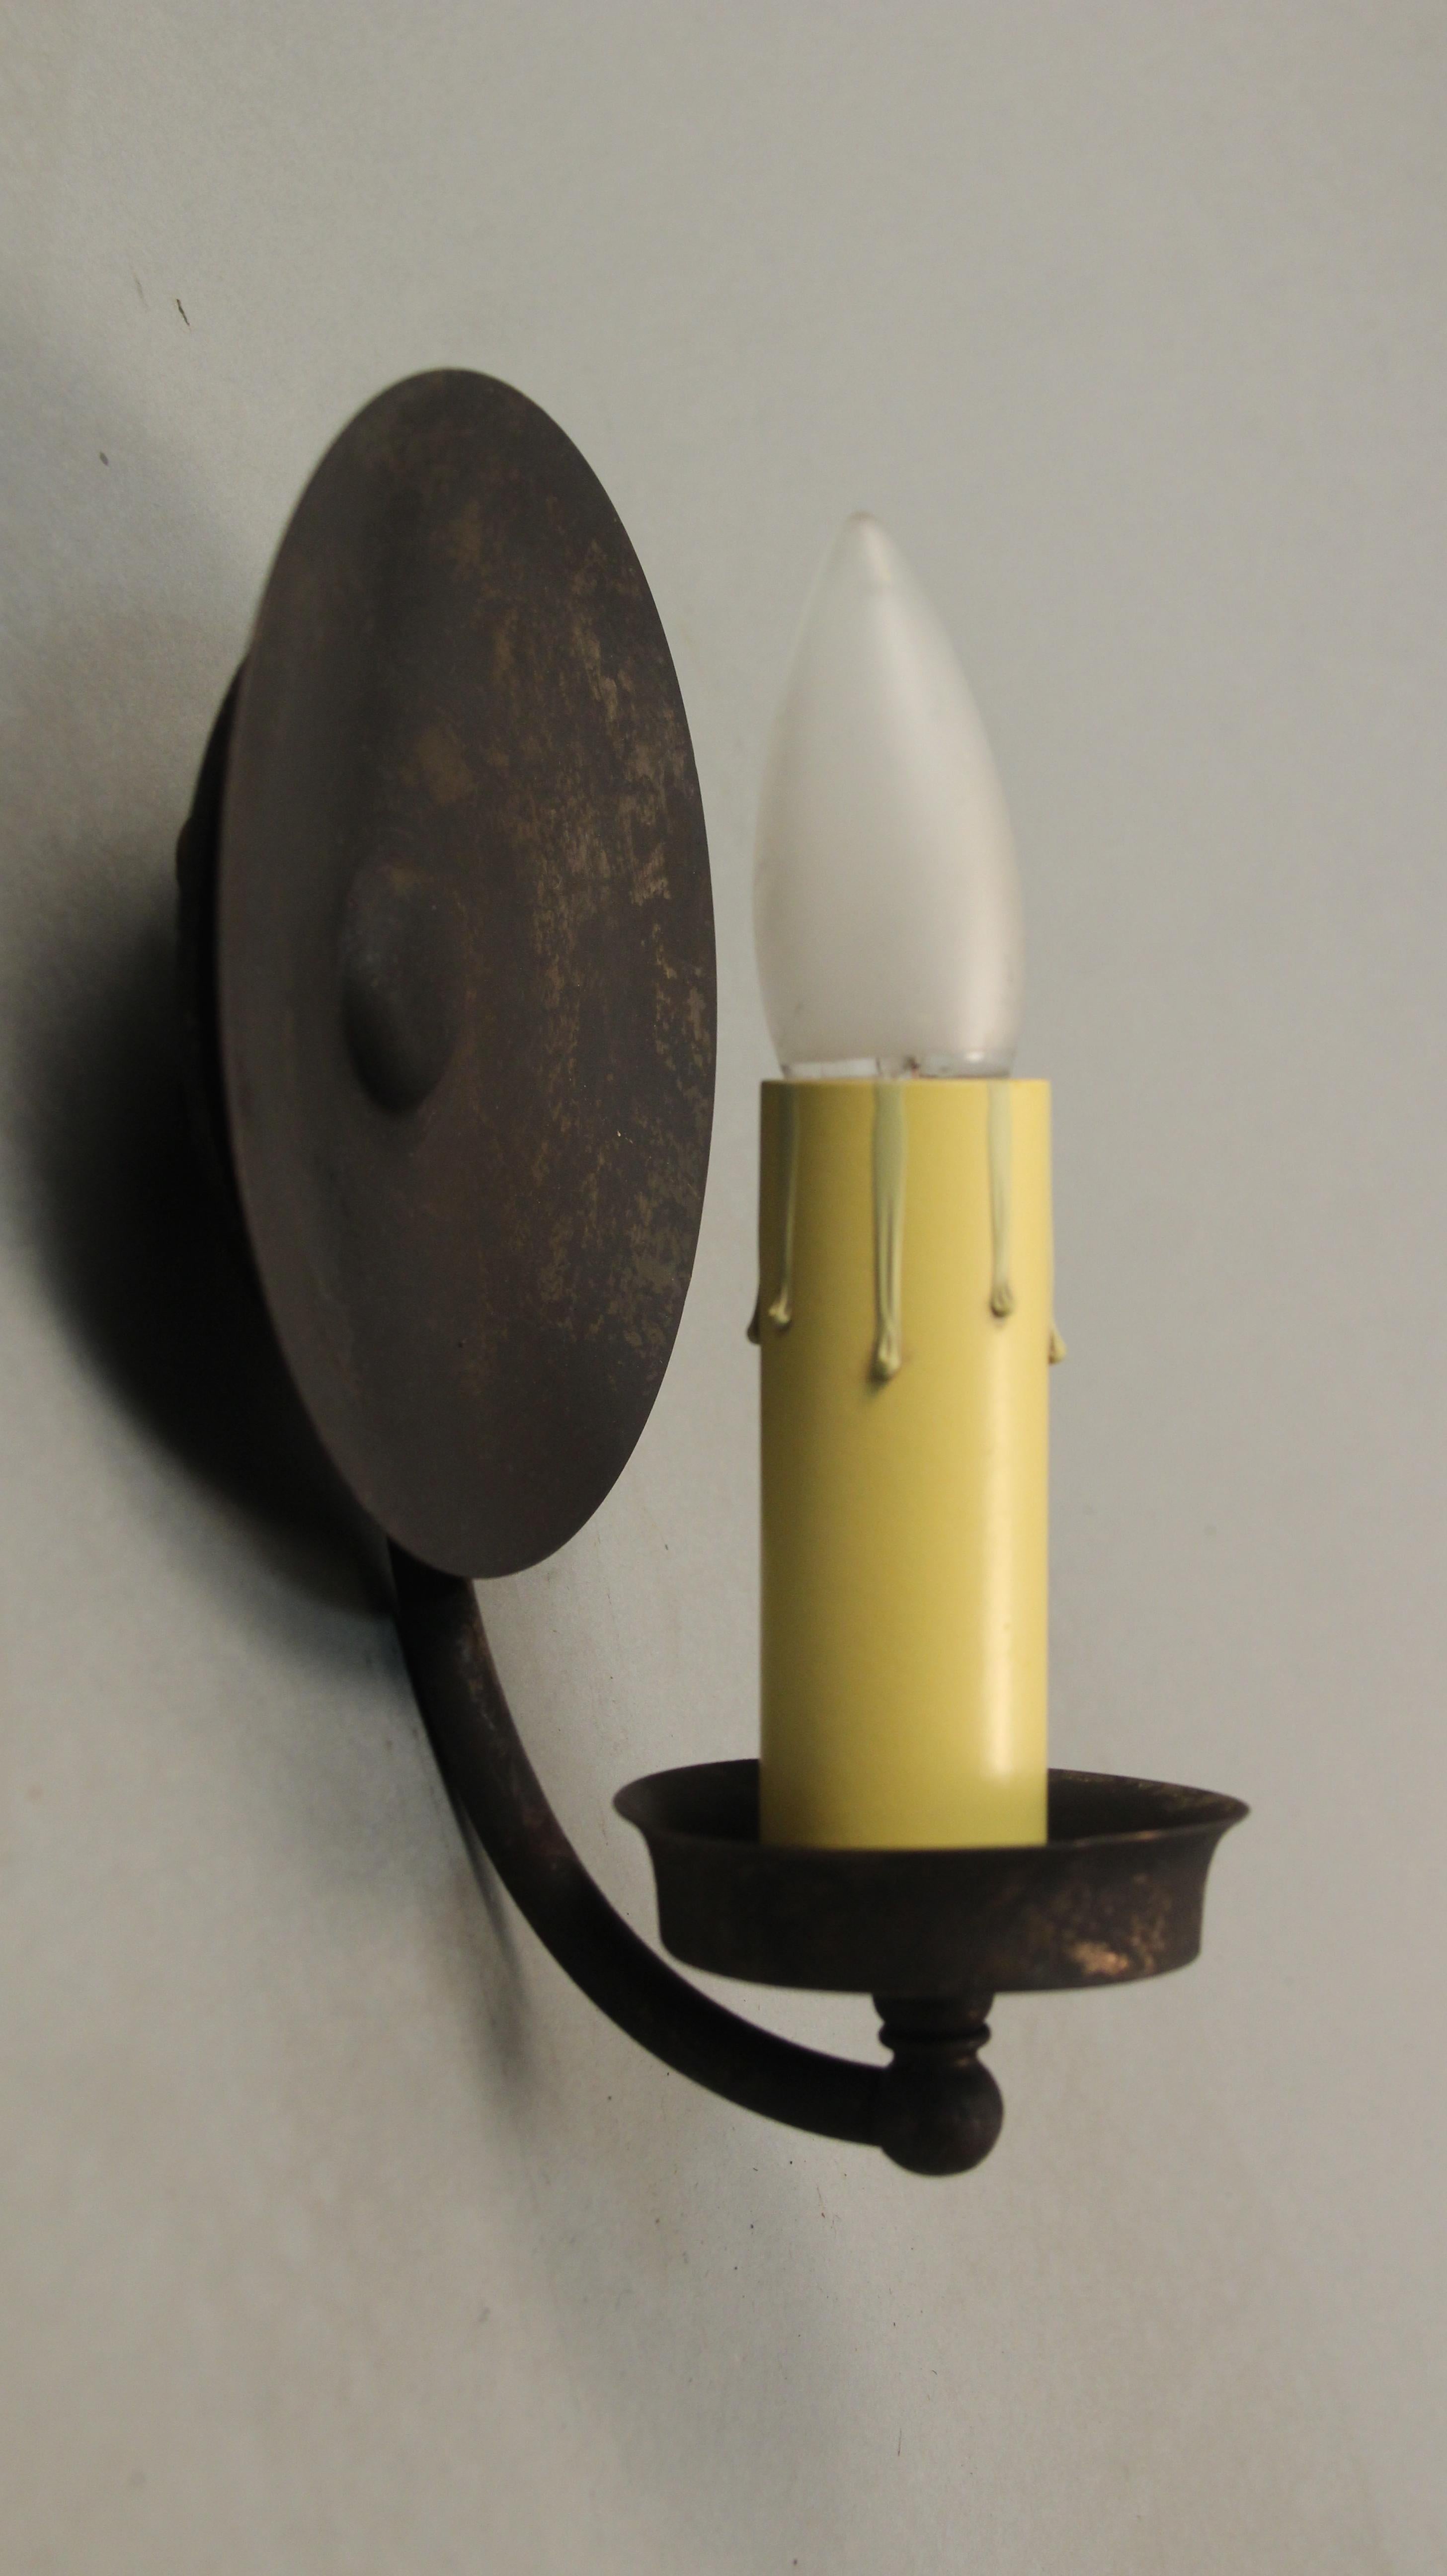 Very nice and simple single sconce, circa 1920s. Would fit nicely with Adobe architecture, Monterey Architecture and Spanish Revival Architecture.